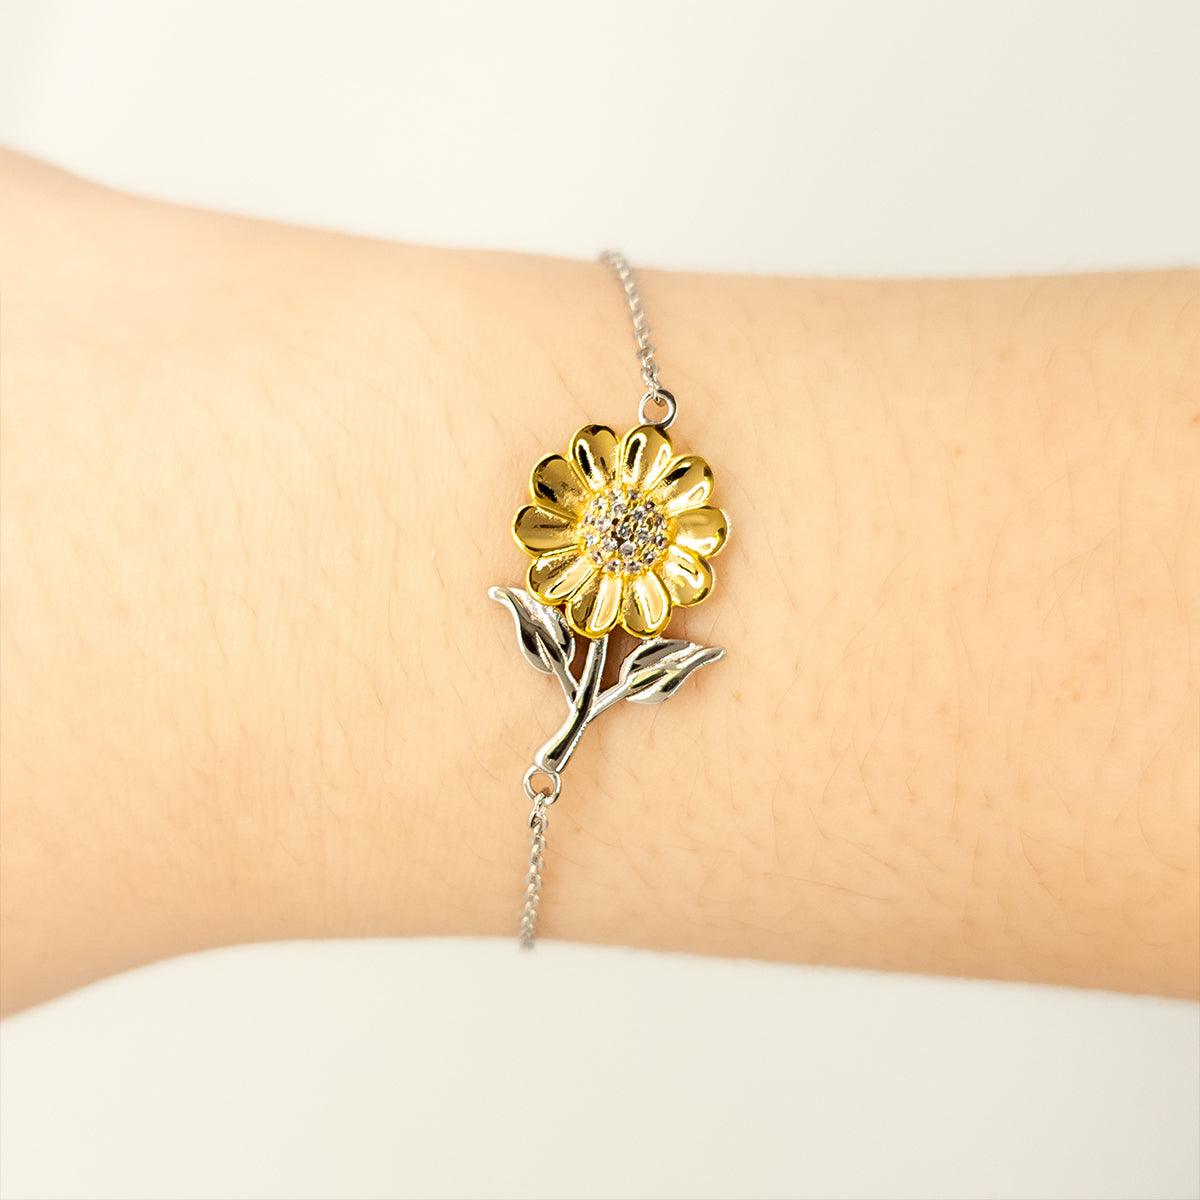 Remarkable Groundskeeper Gifts, Your dedication and hard work, Inspirational Birthday Christmas Unique Sunflower Bracelet For Groundskeeper, Coworkers, Men, Women, Friends - Mallard Moon Gift Shop